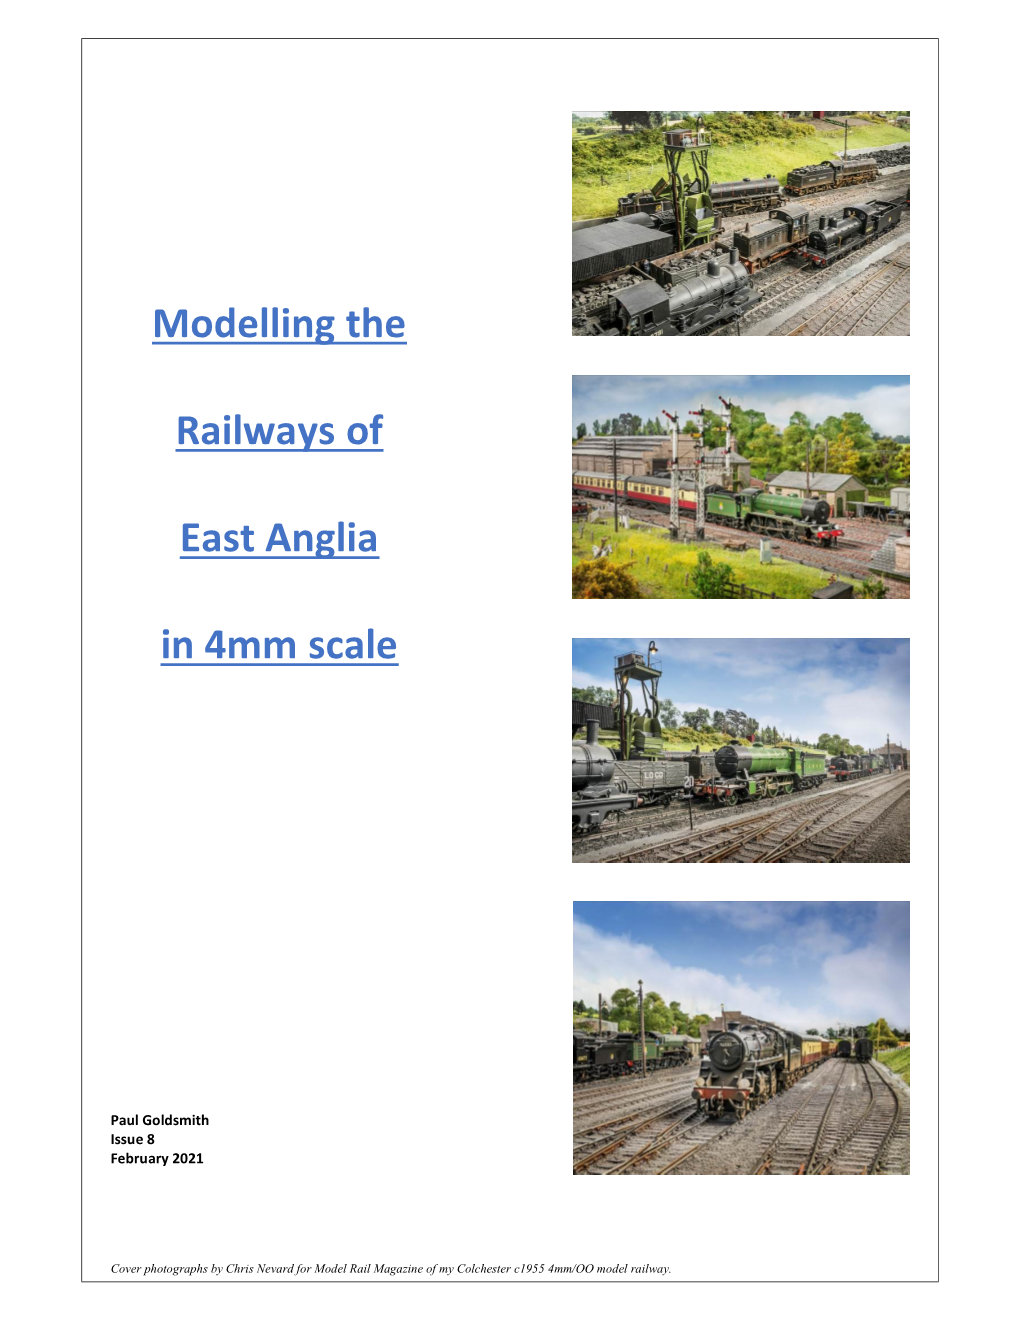 Modelling the Railways of East Anglia in 4Mm Scale